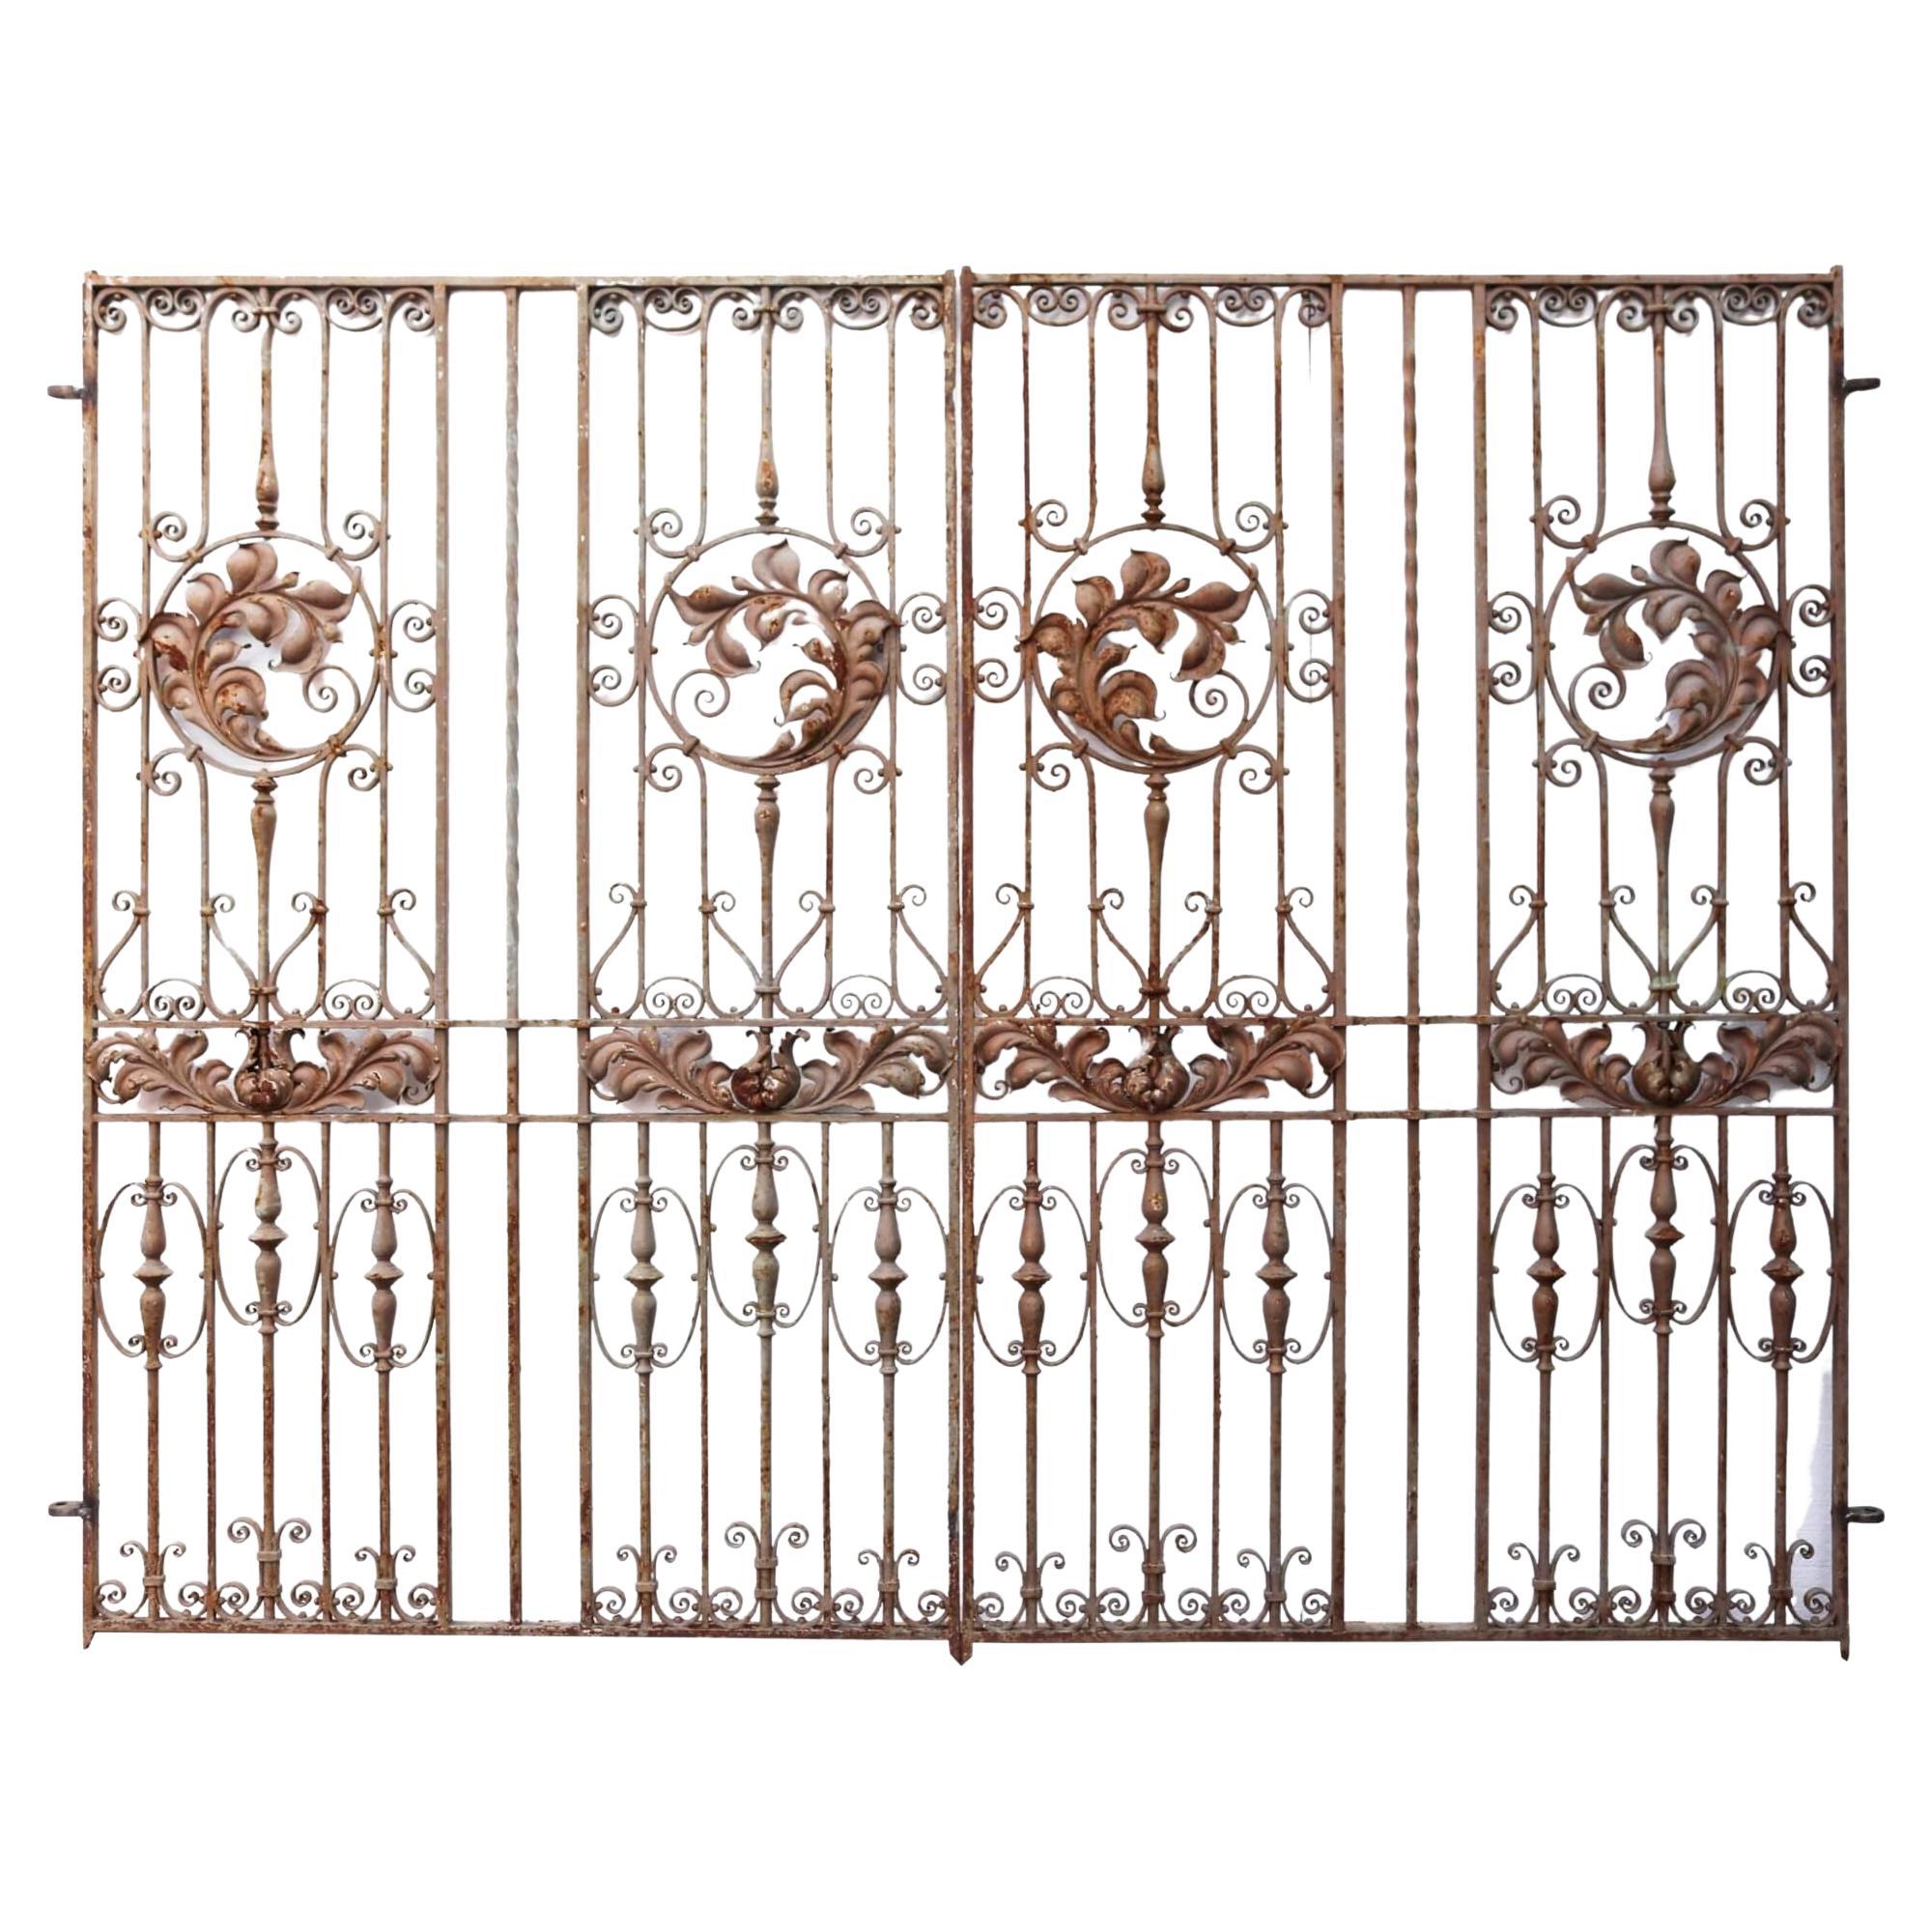 Set of French Antique Wrought Iron Driveway Gates 294cm (9’6”) For Sale